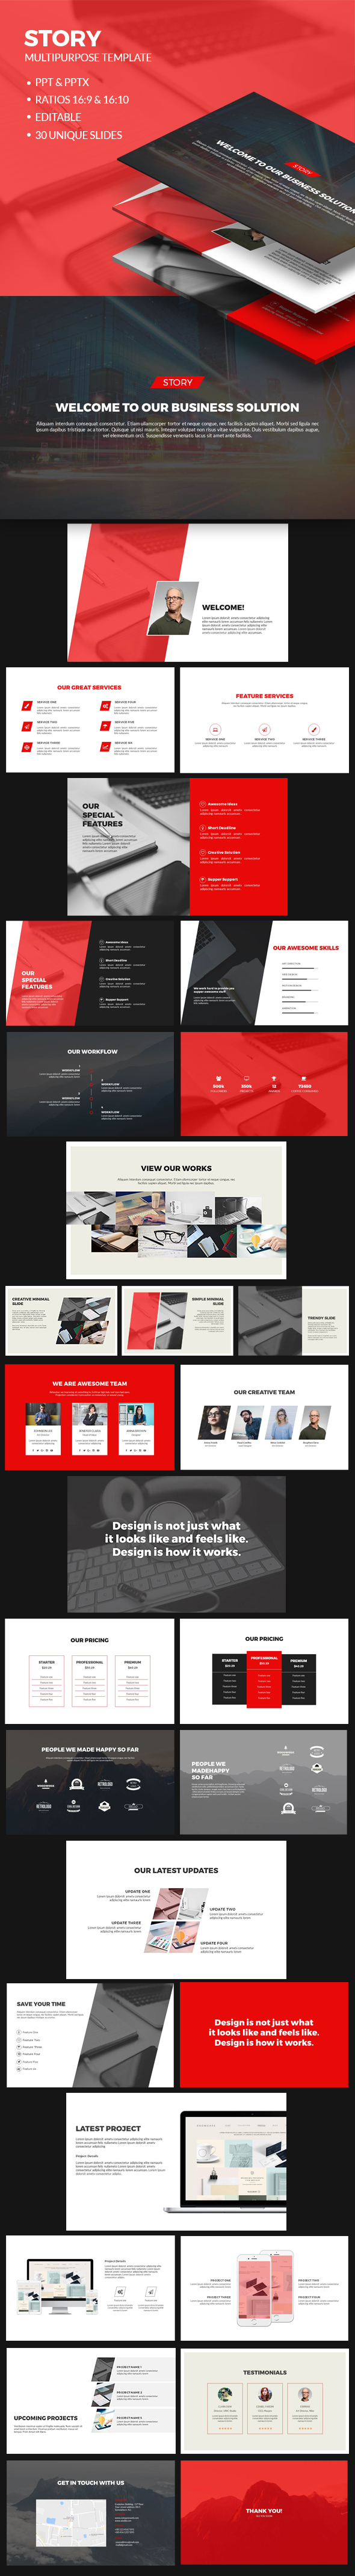 Clean PowerPoint Presentation Template-V02